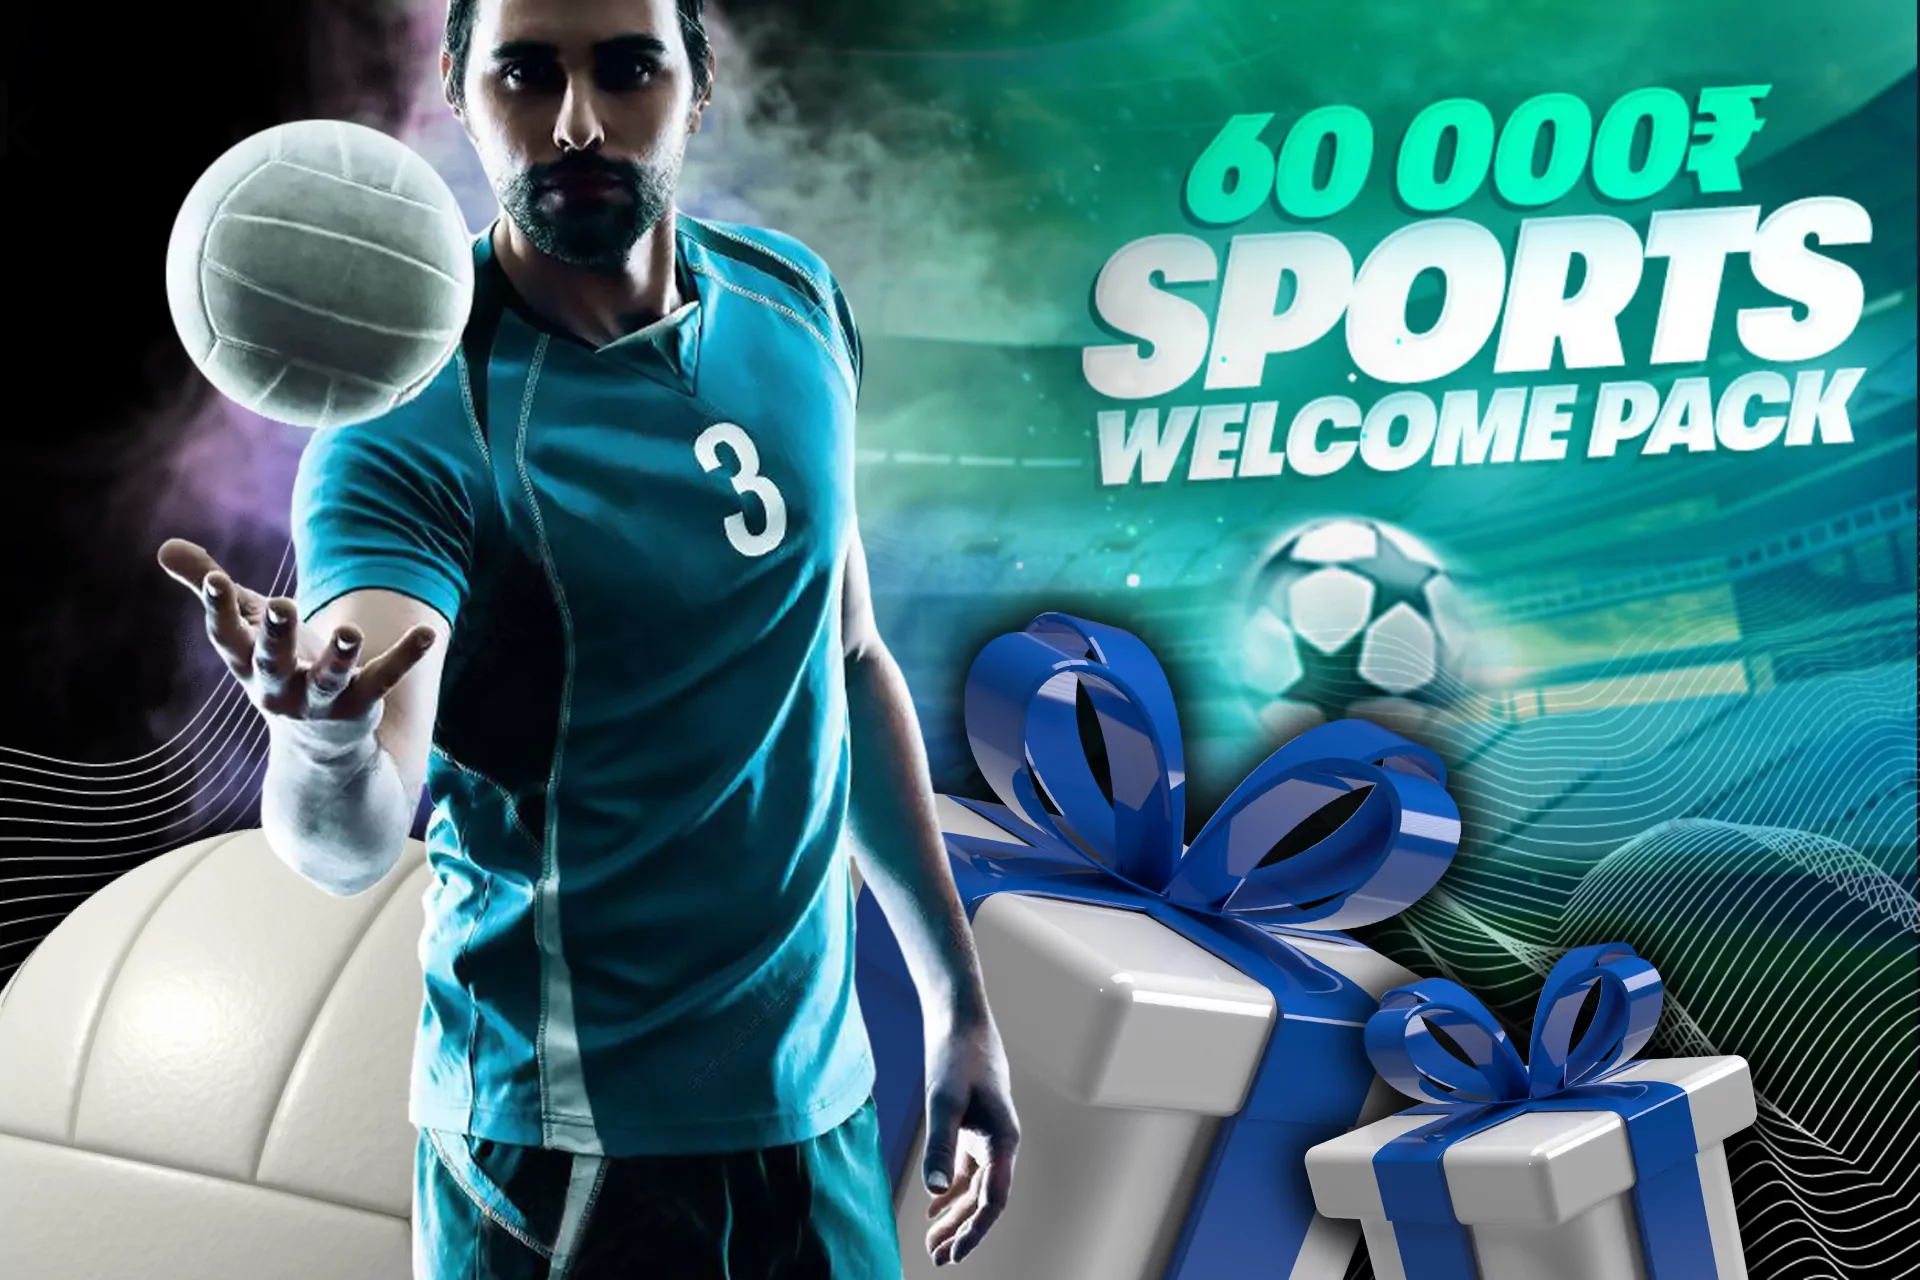 All the information about how the velcom bonus works in volleyball betting.